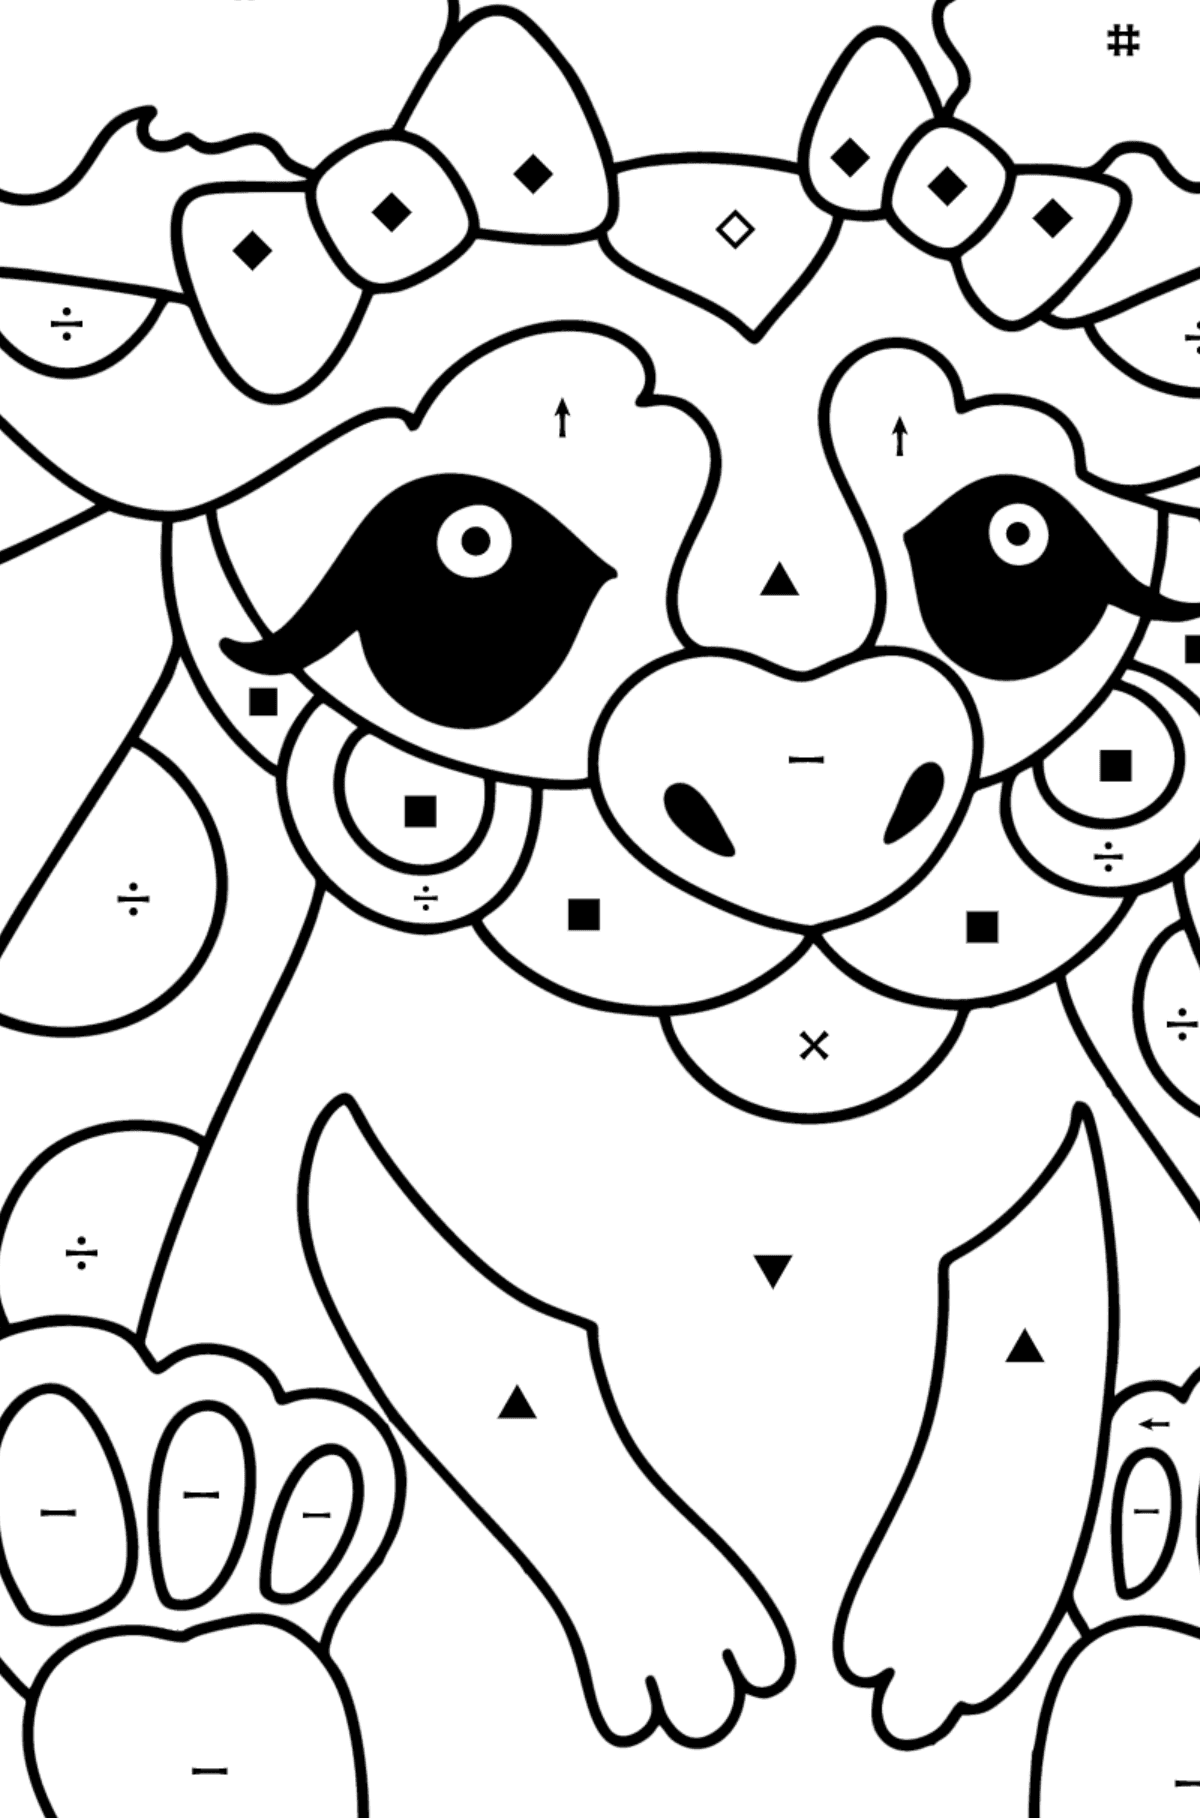 Dragon girl coloring page - Coloring by Symbols for Kids